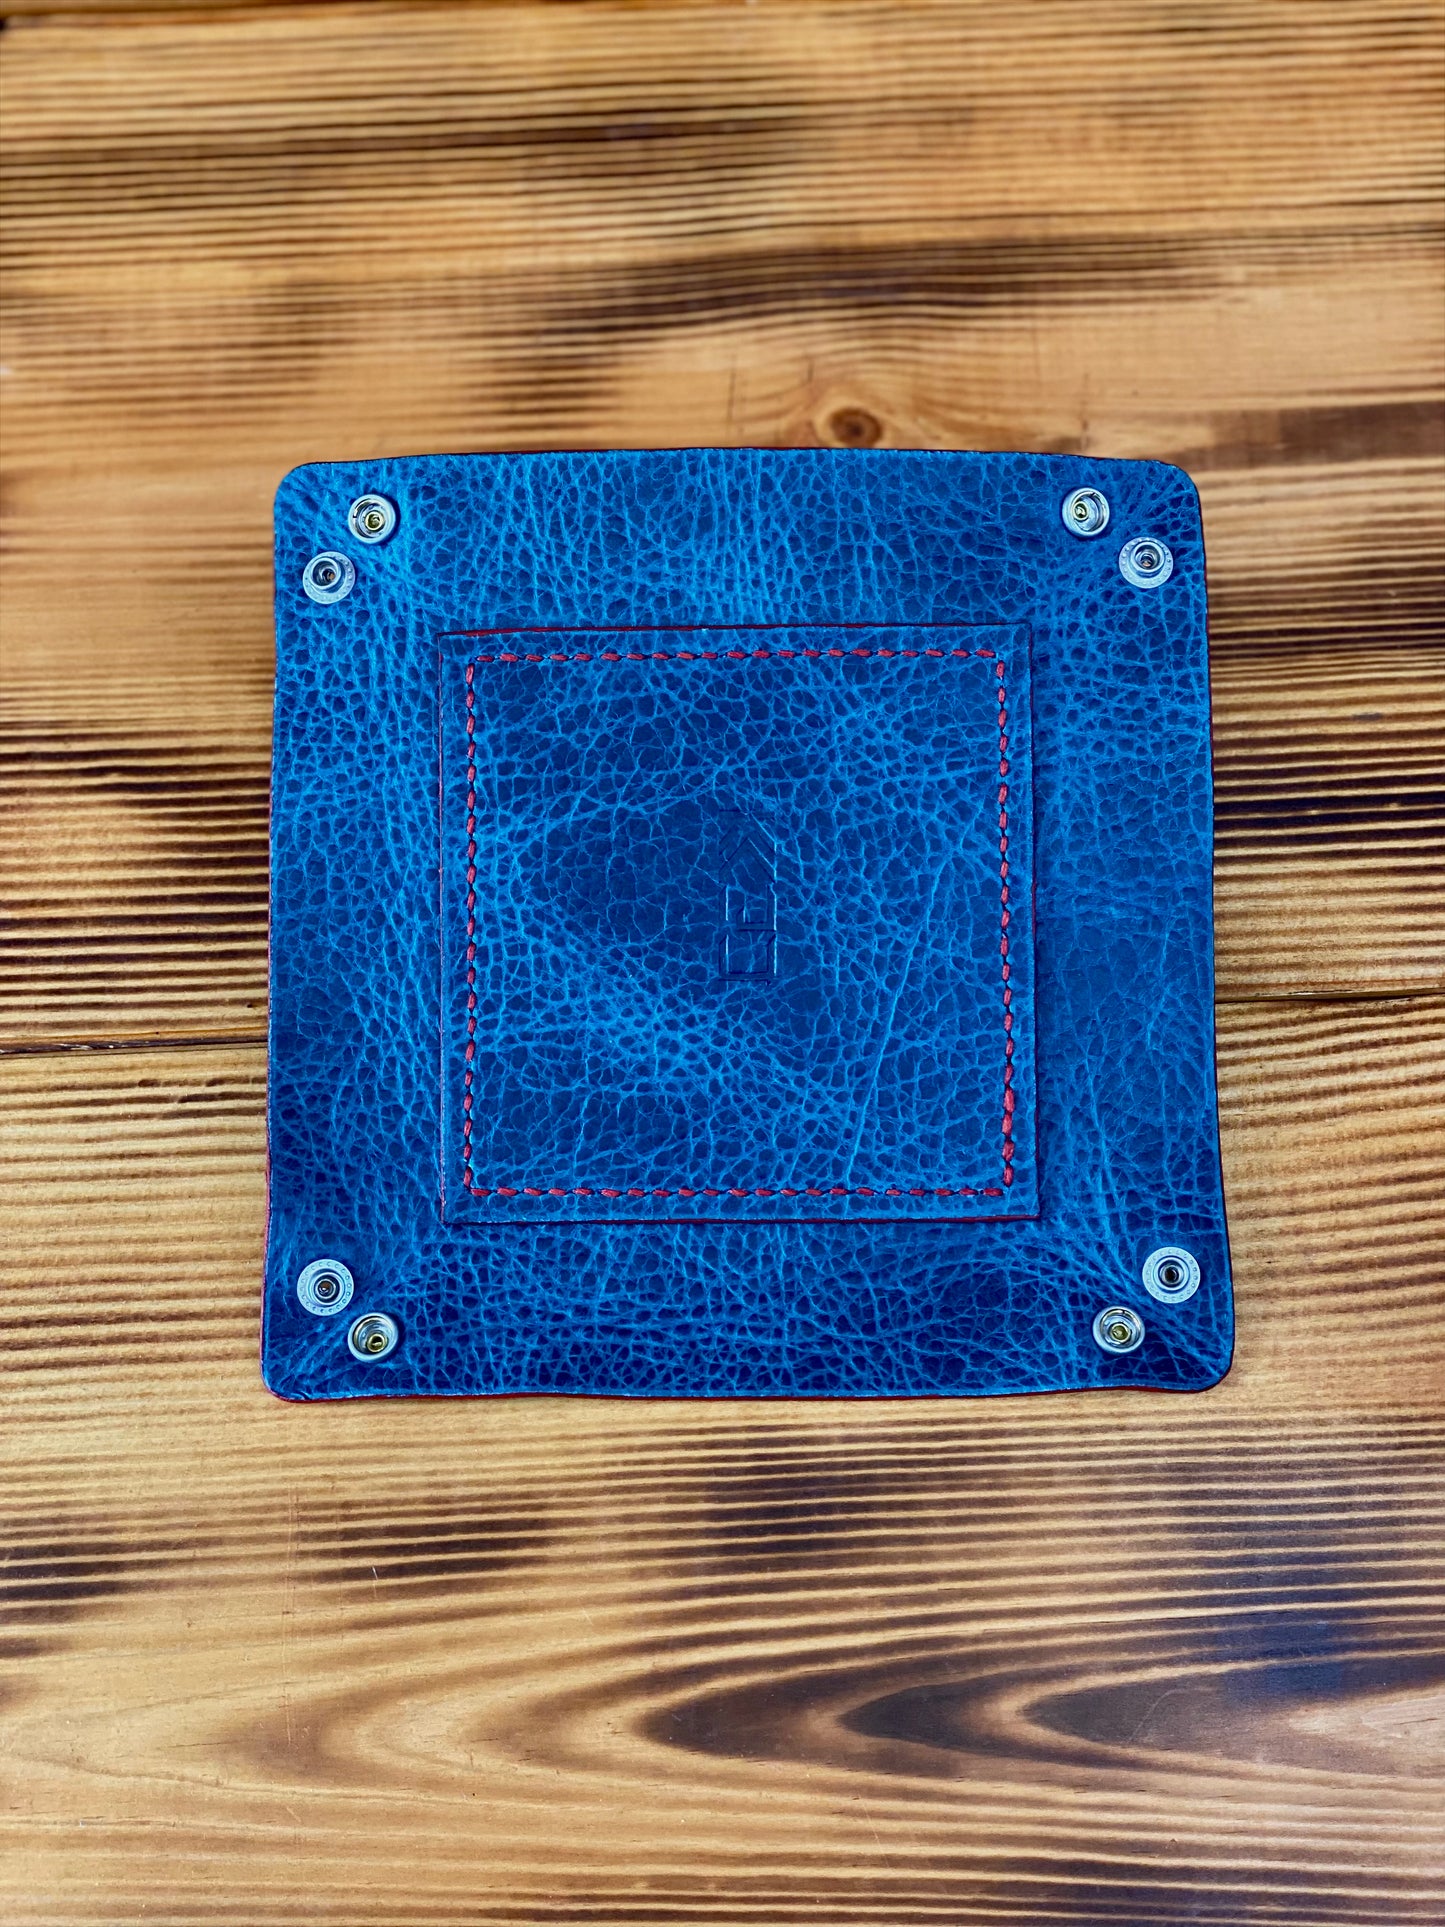 Kaiju Cut and Sew Handmade Leather Catch All | Dice Tray | Made in Austin, Texas | Blue Bison Leather